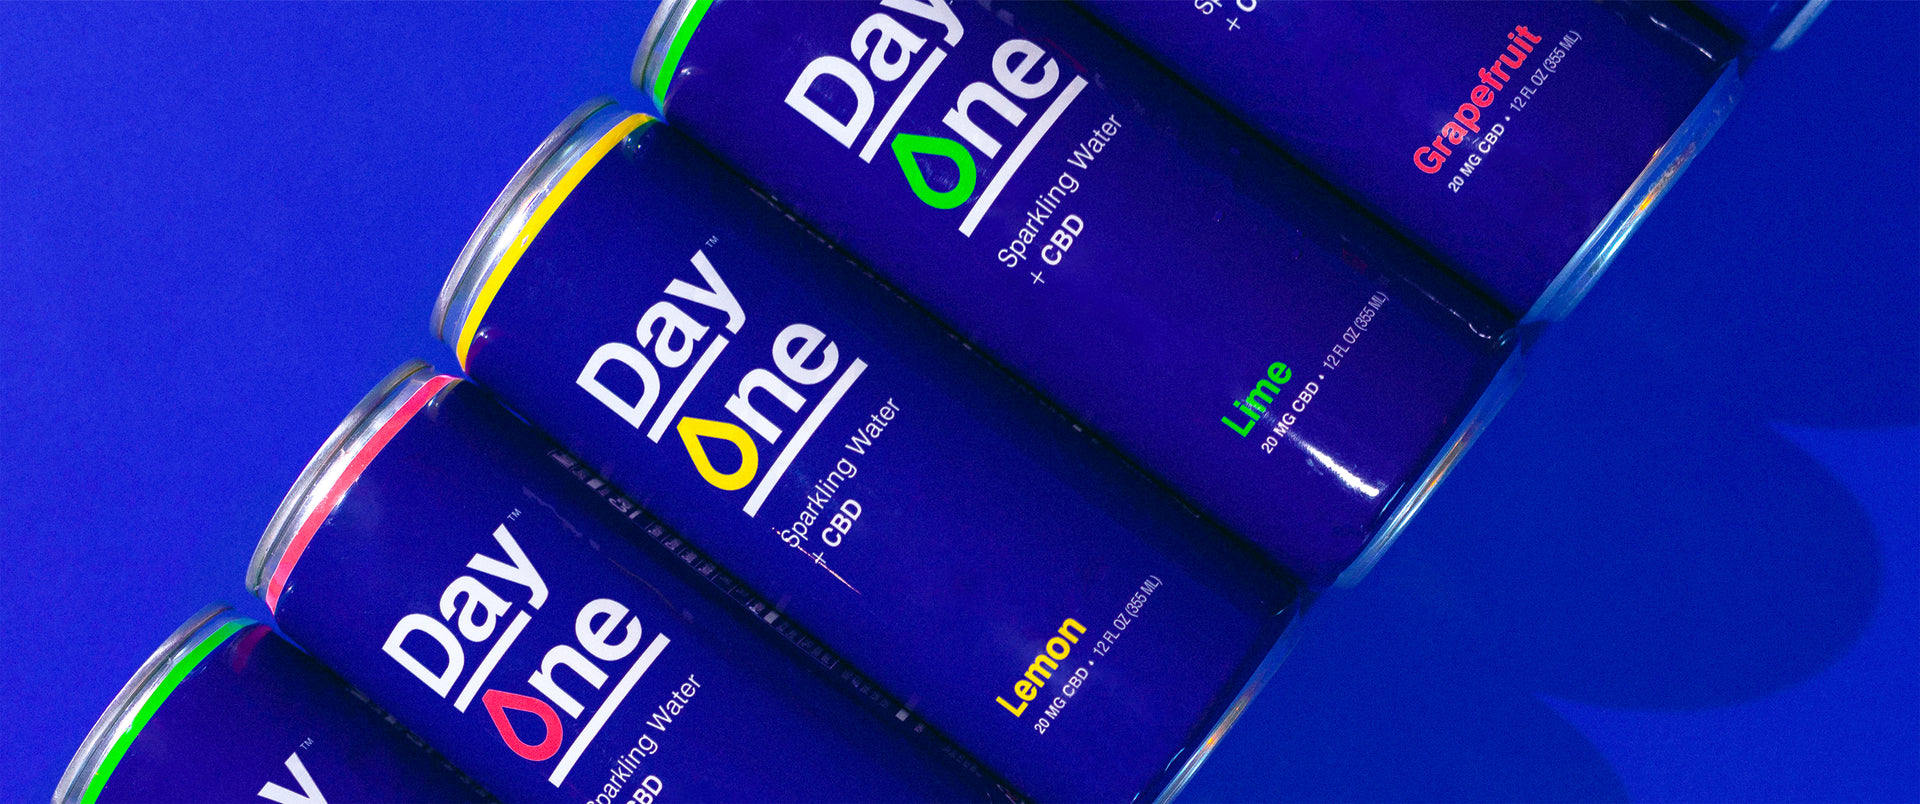 Three flavors of Day One CBD beverage cans